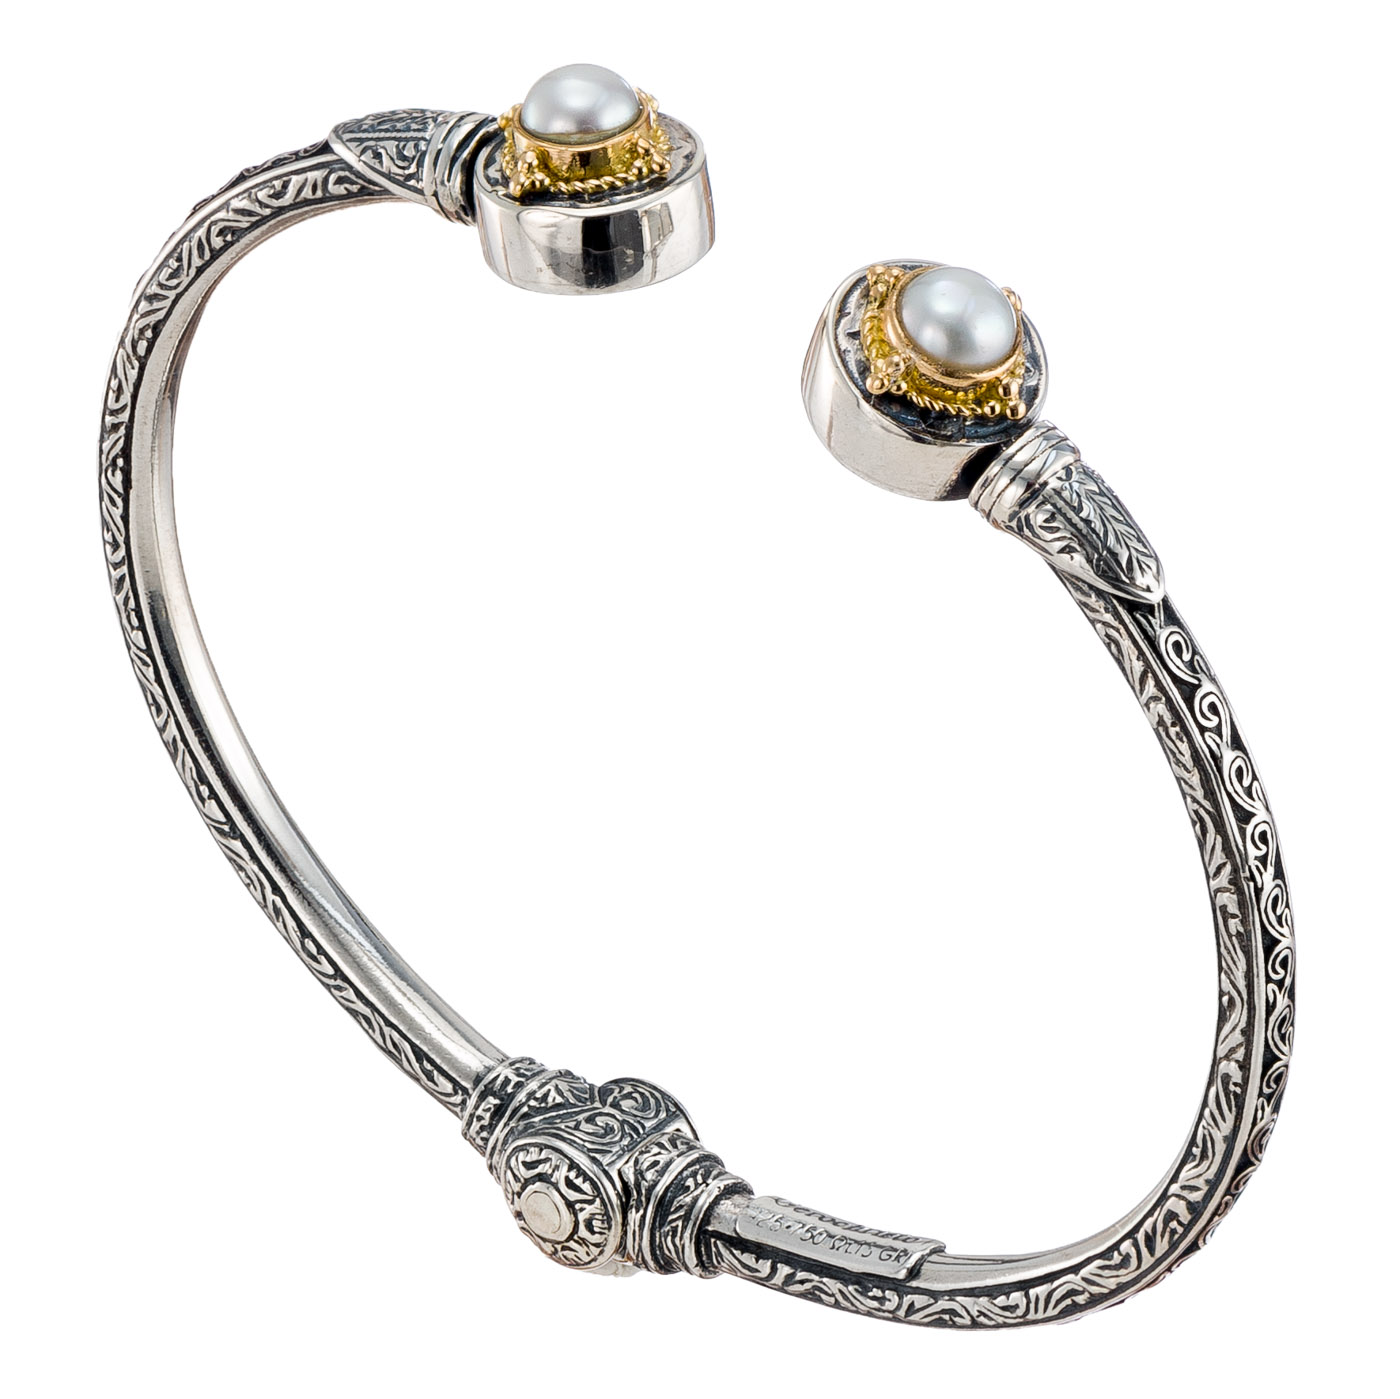 Cyclades round bracelet in 18K Gold and Sterling silver